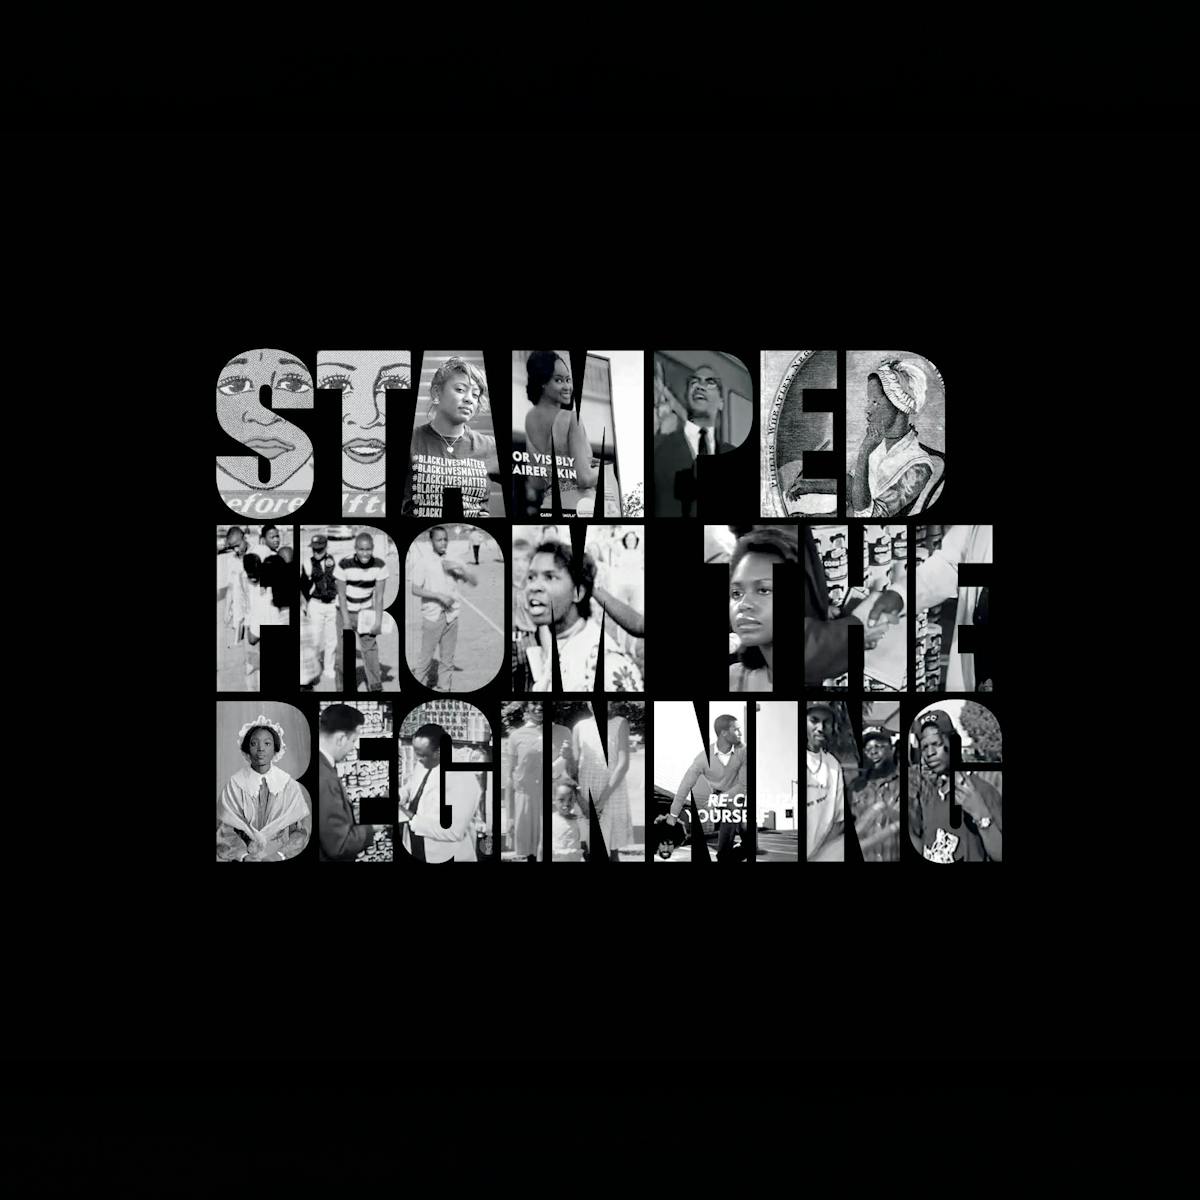 Stamped from the Beginning title treatment: against a black background are letters, which are made up of images, spelling out the title. 